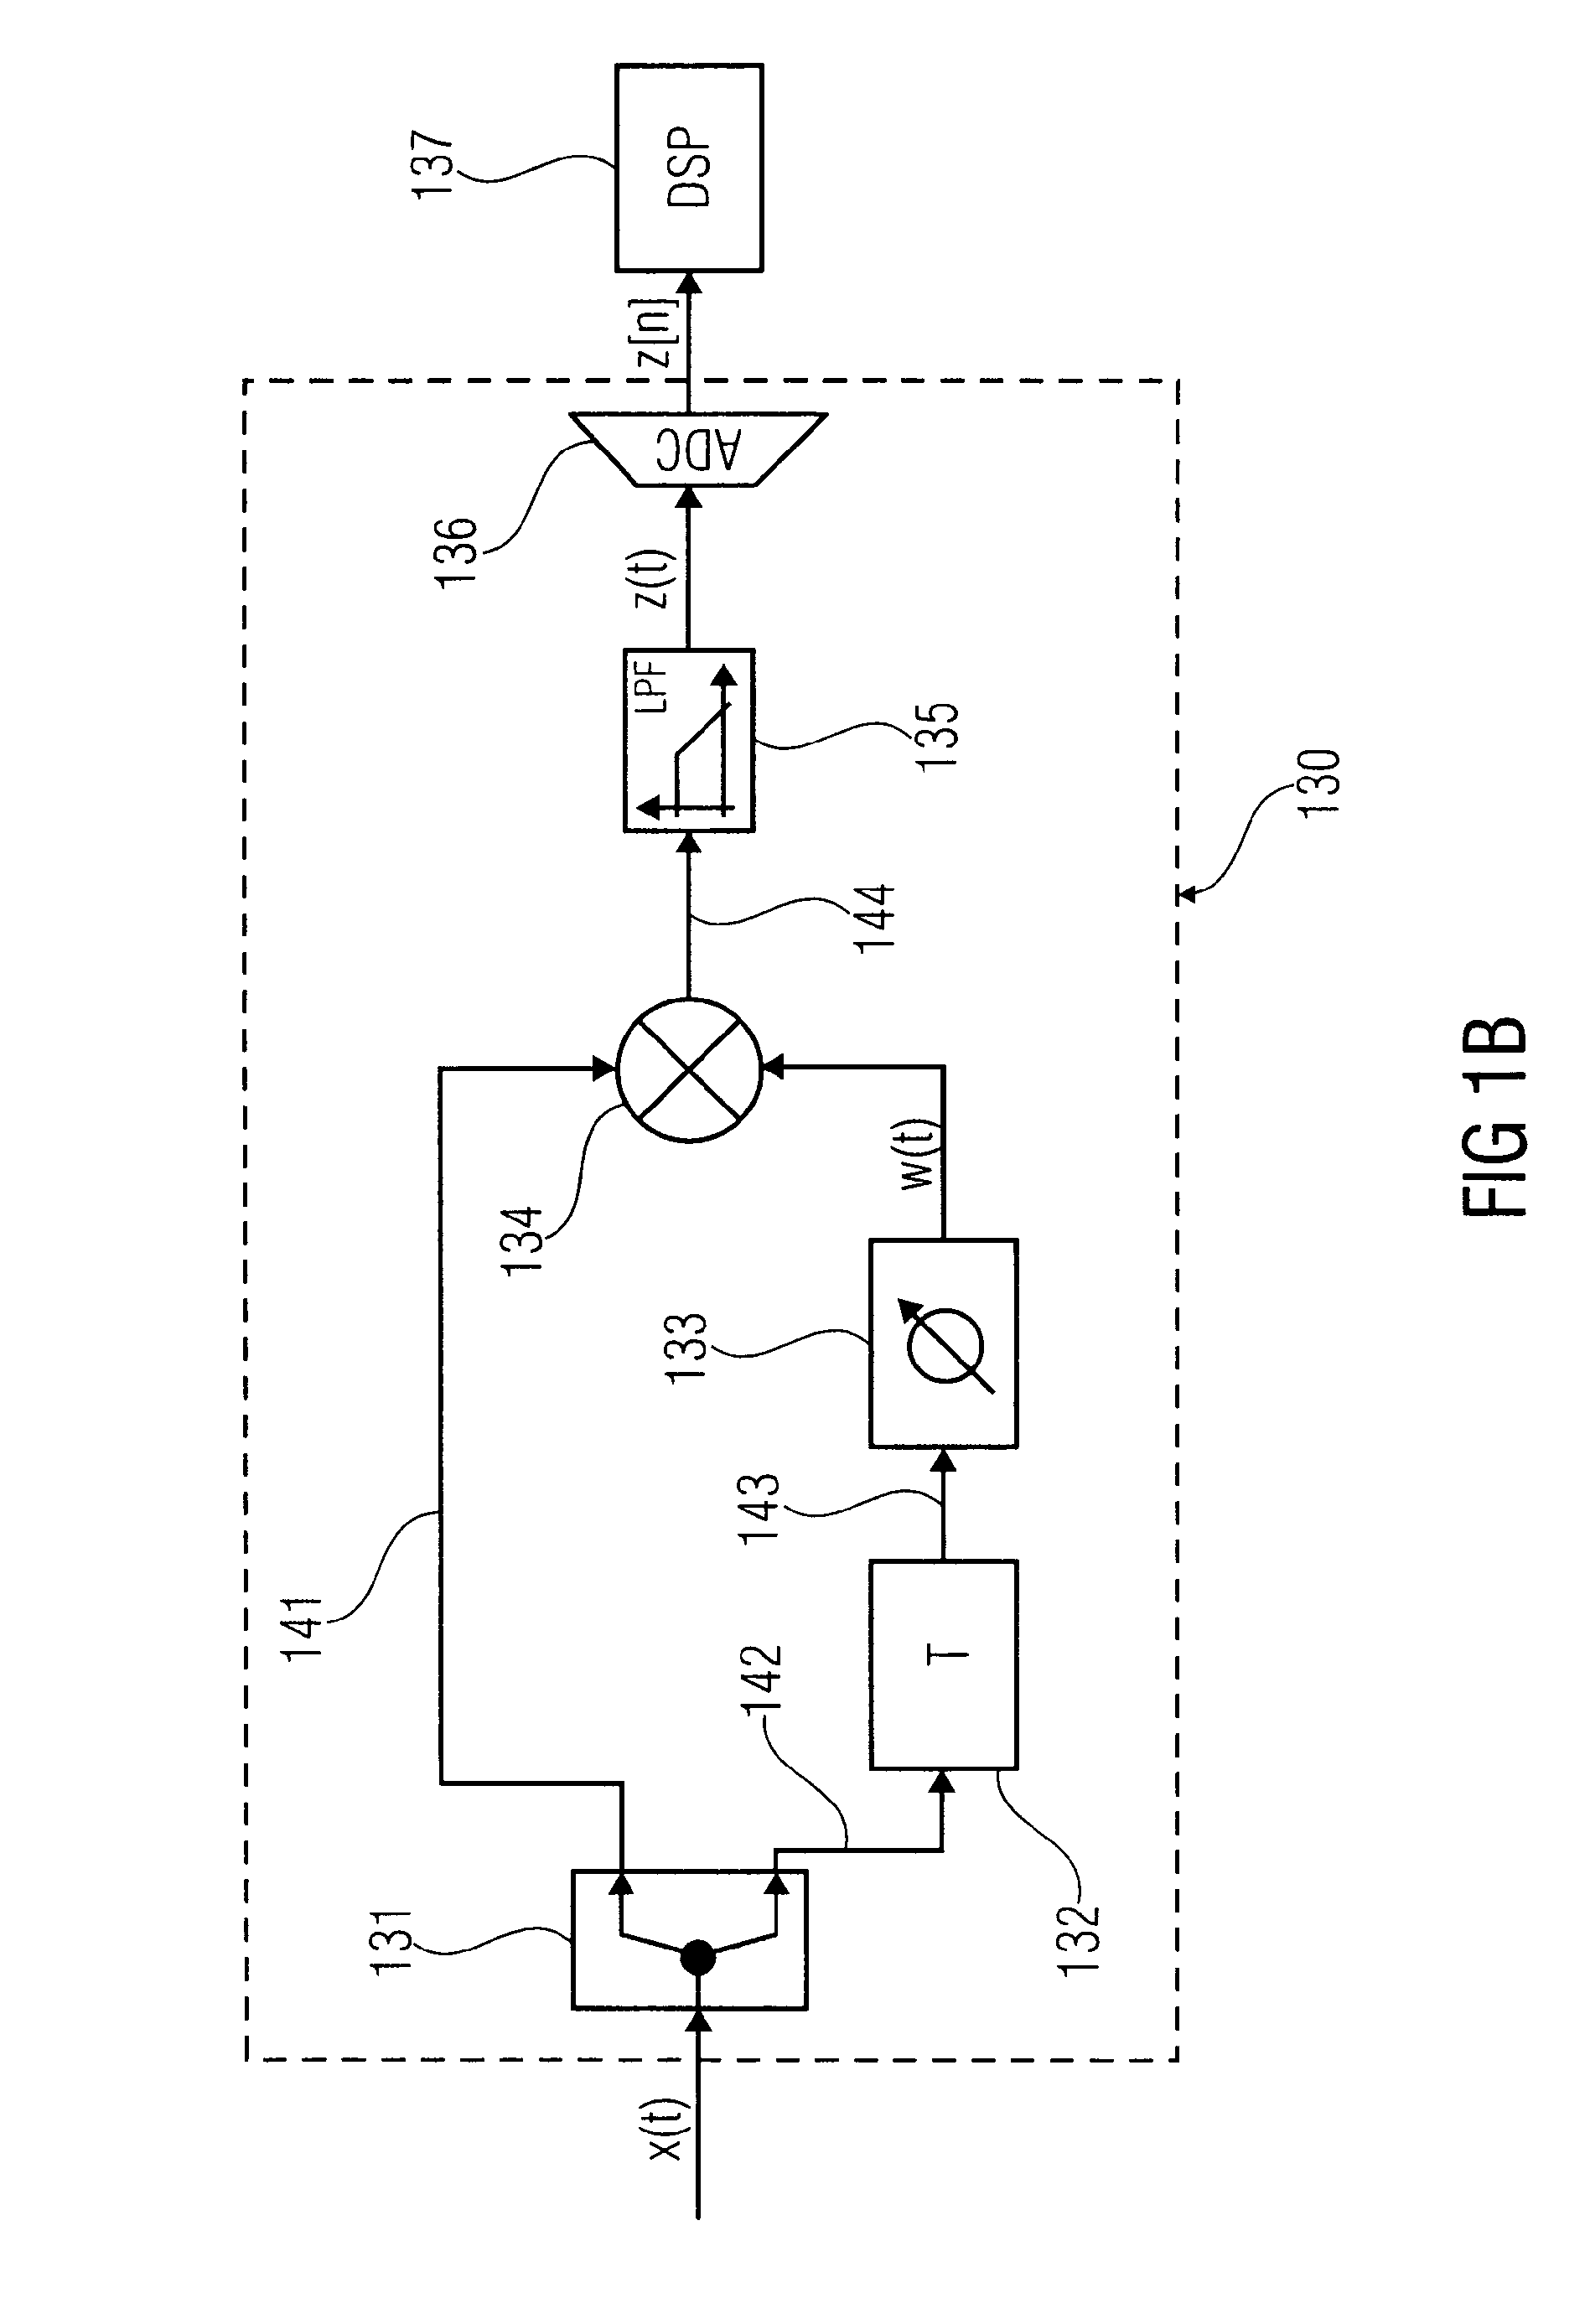 Apparatus comprising a recursive delayer and method for measuring a phase noise